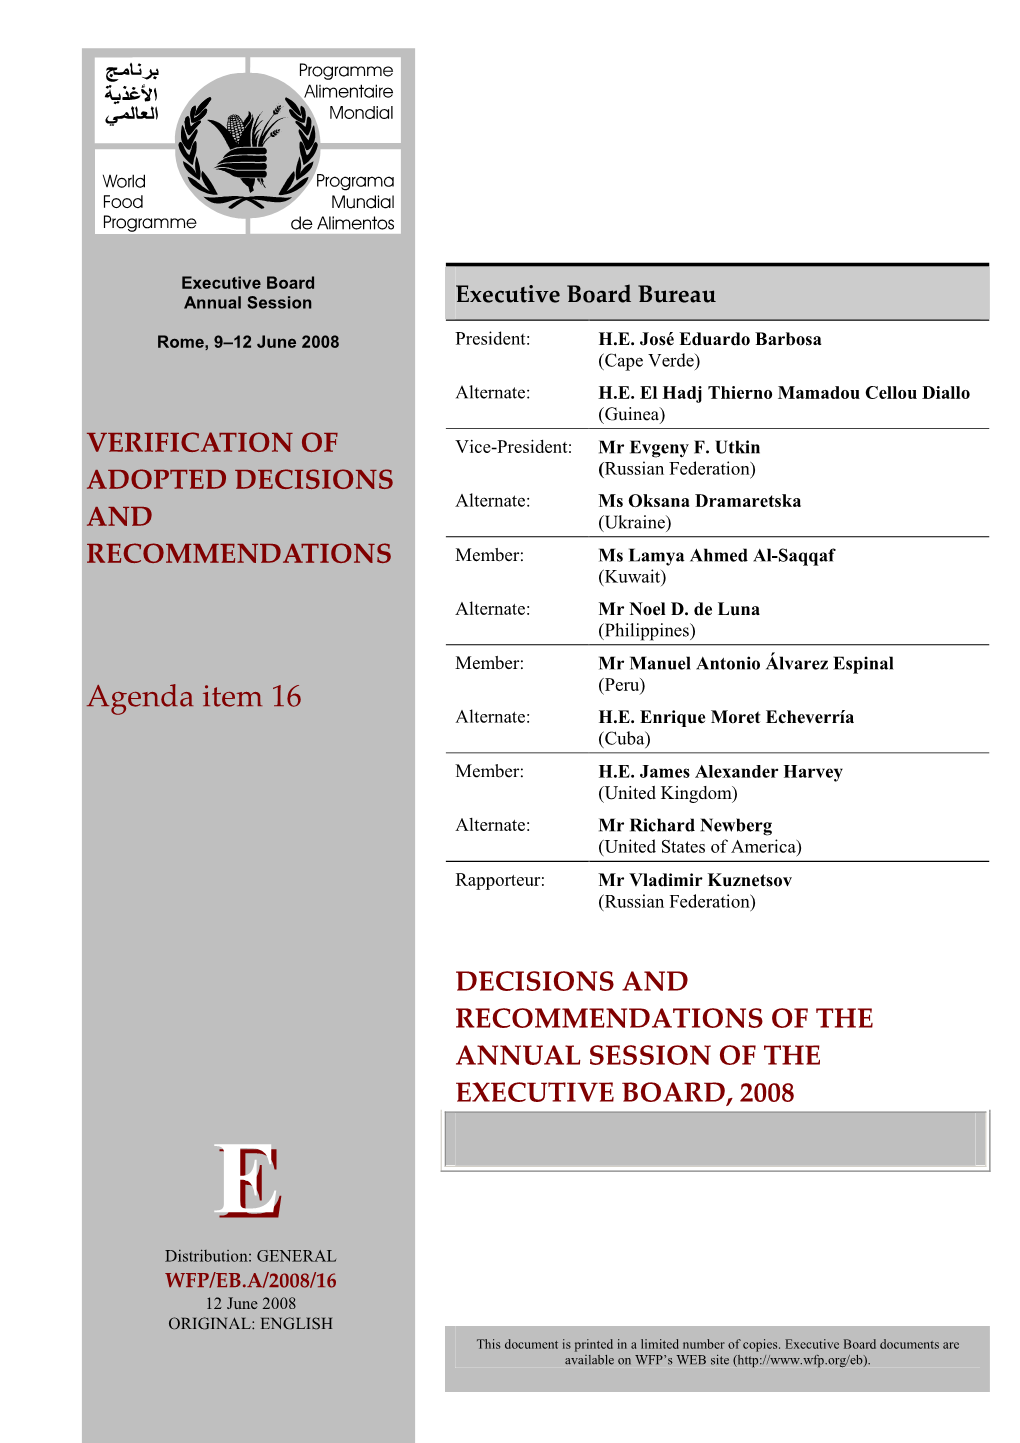 Verification of Adopted Decisions and Recommendations